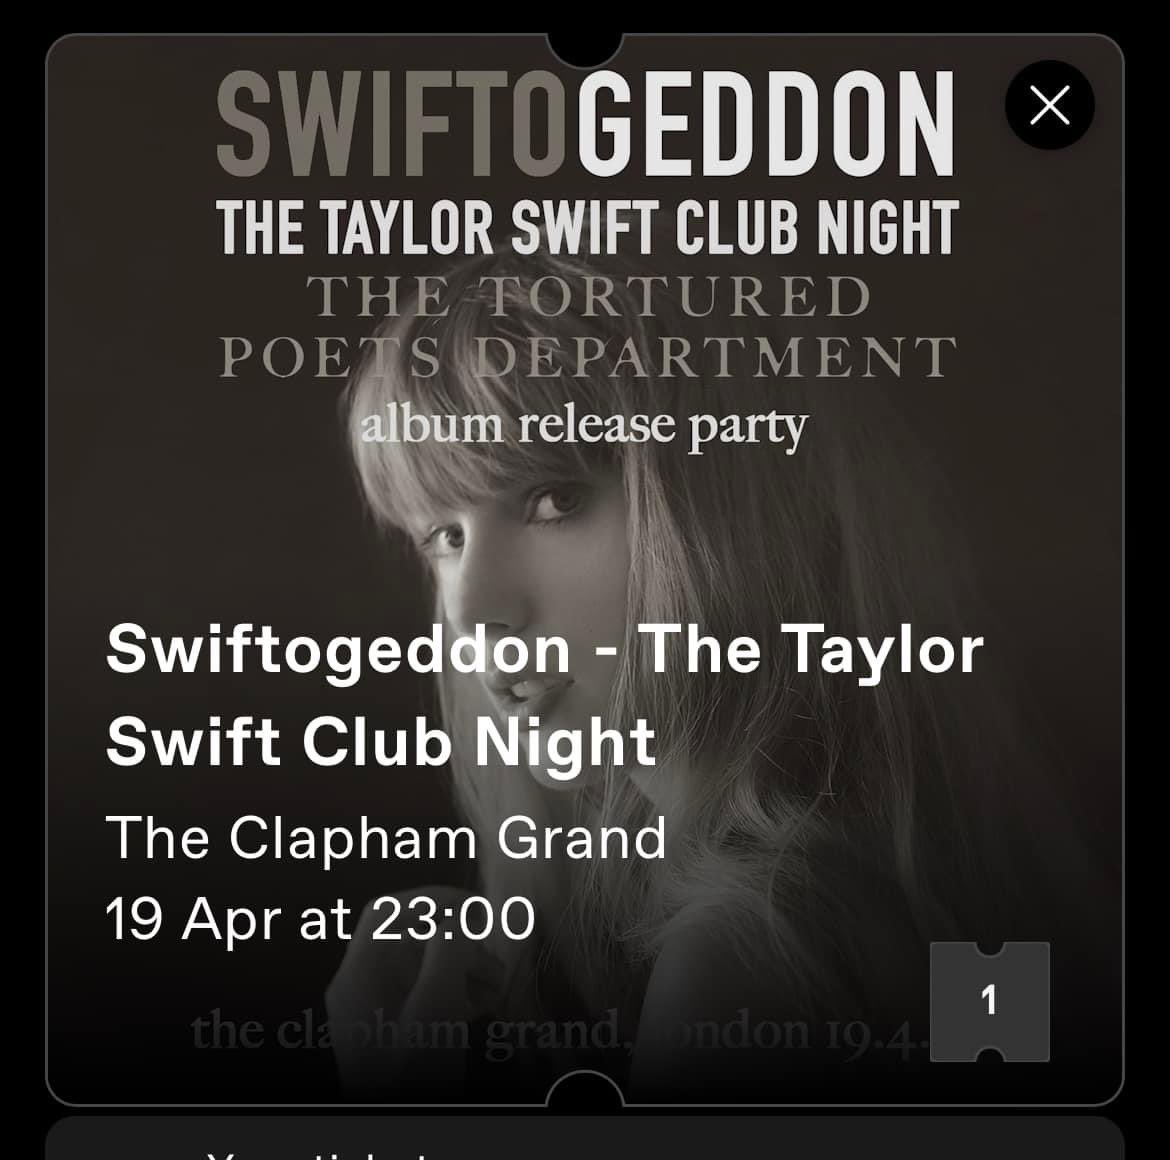 *ISO* 

Hi all! 
Desperately looking for a ticket to SWIFTOGEDDON’s TTPD release party next Friday in London (Clapham) so my Session bestie & I can go together.   If anyone has a ticket looking to sell, please DM me! 

Thank you. ❤️ #Swiftogeddon #TTPD #ISO @swiftogeddon